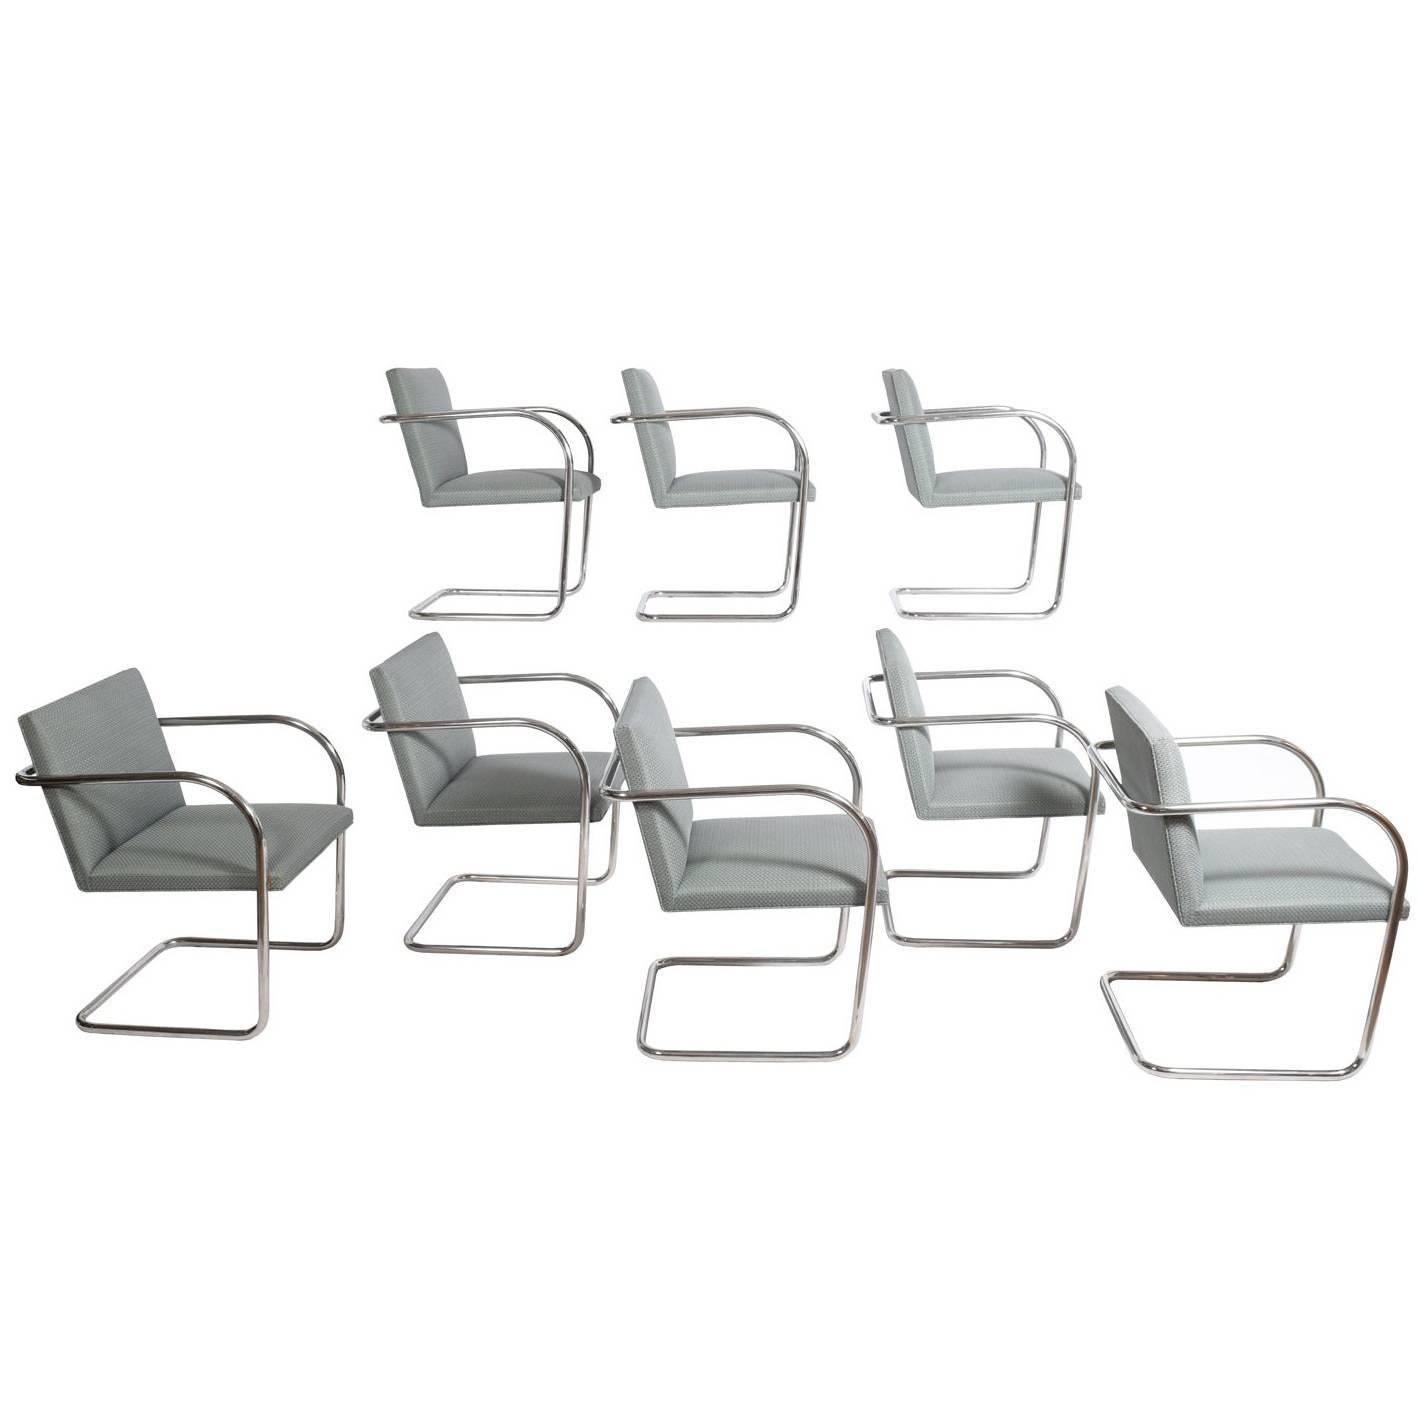 Set of Eight Stainless Steel Brno Chairs by Mies van der Rohe for Knoll Inc.